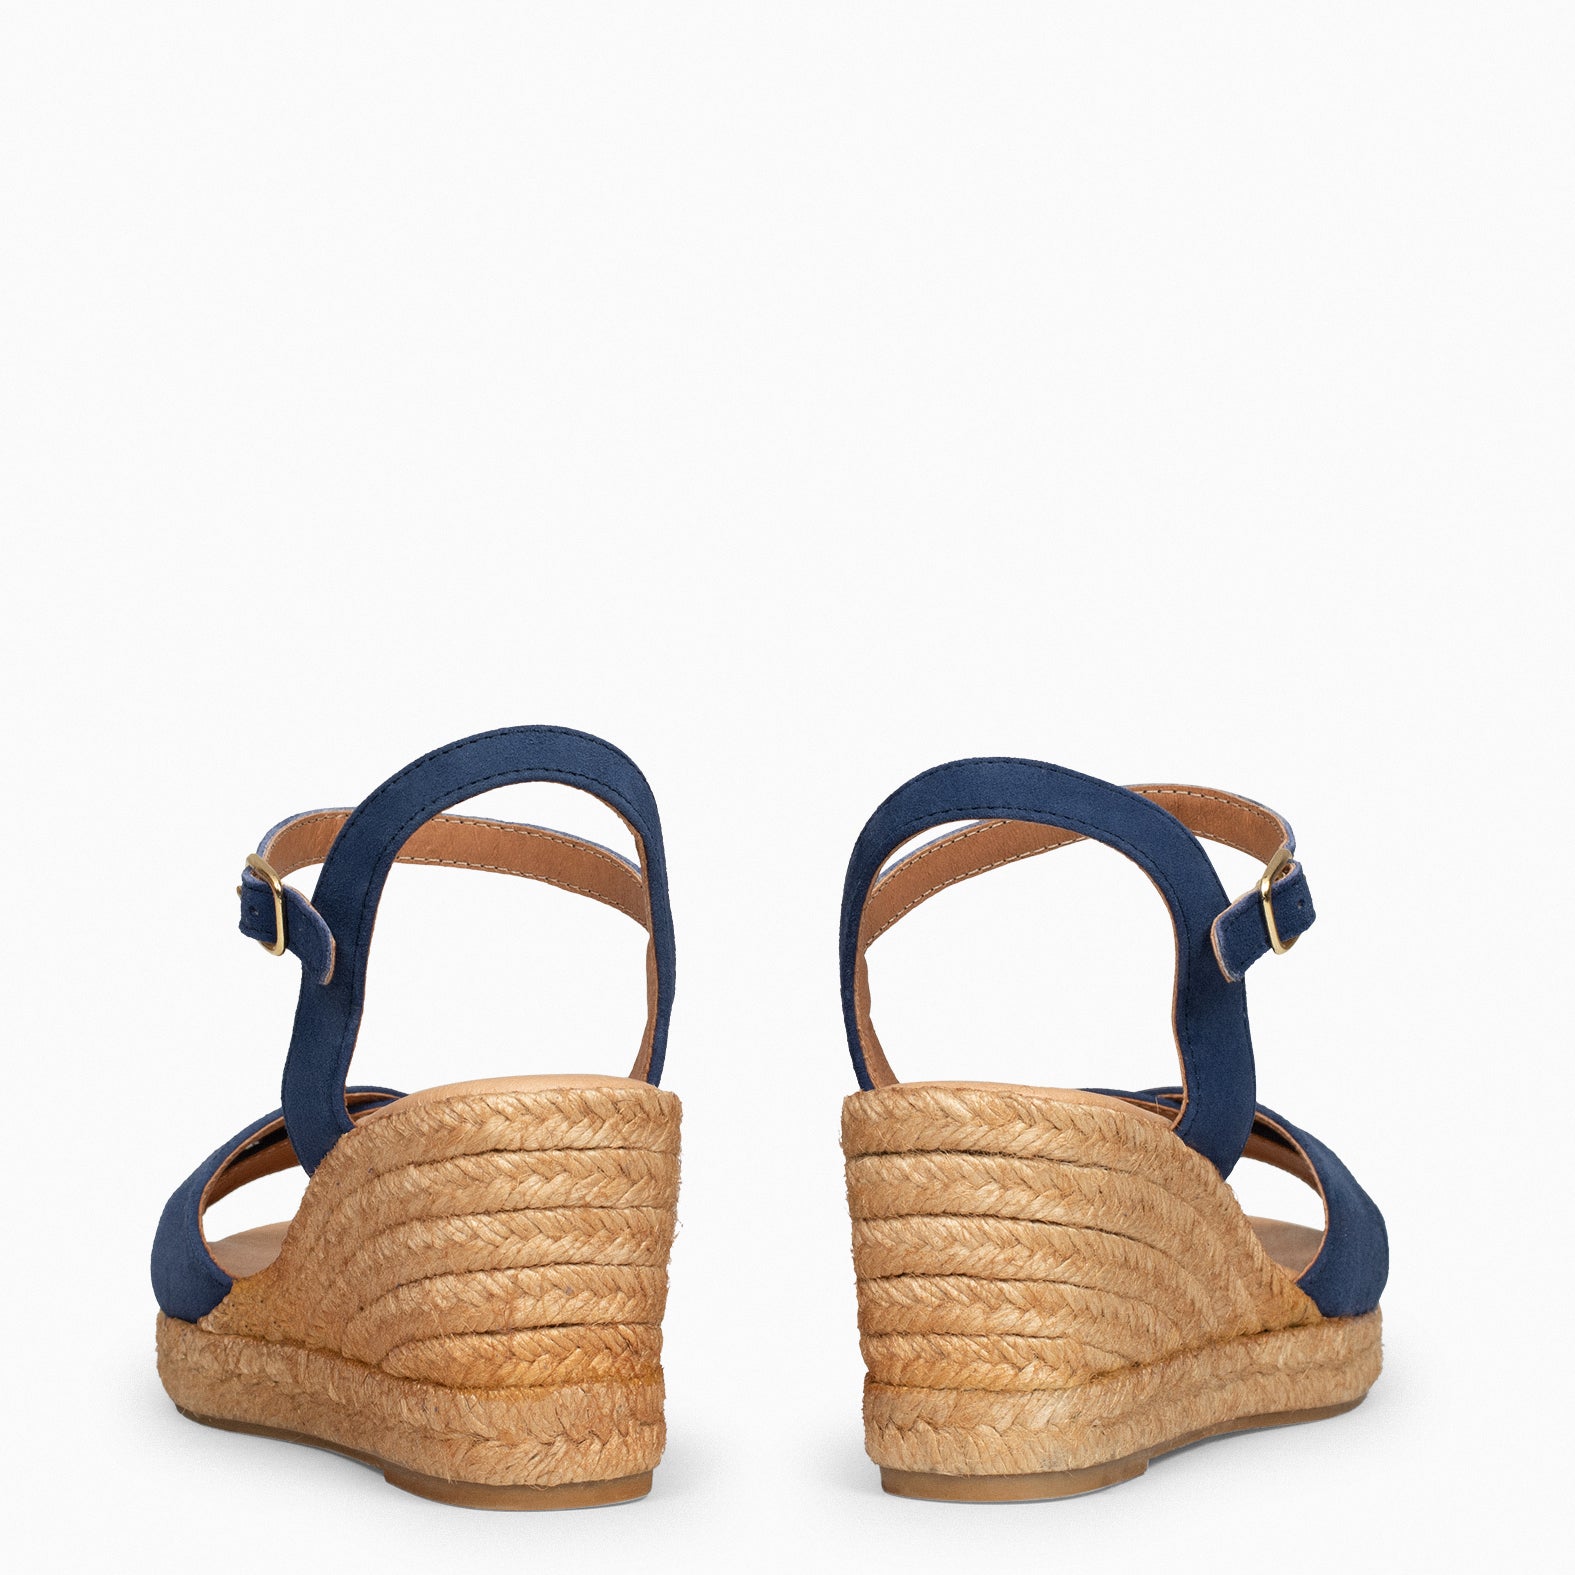 CALPE – NAVY suede leather espadrille